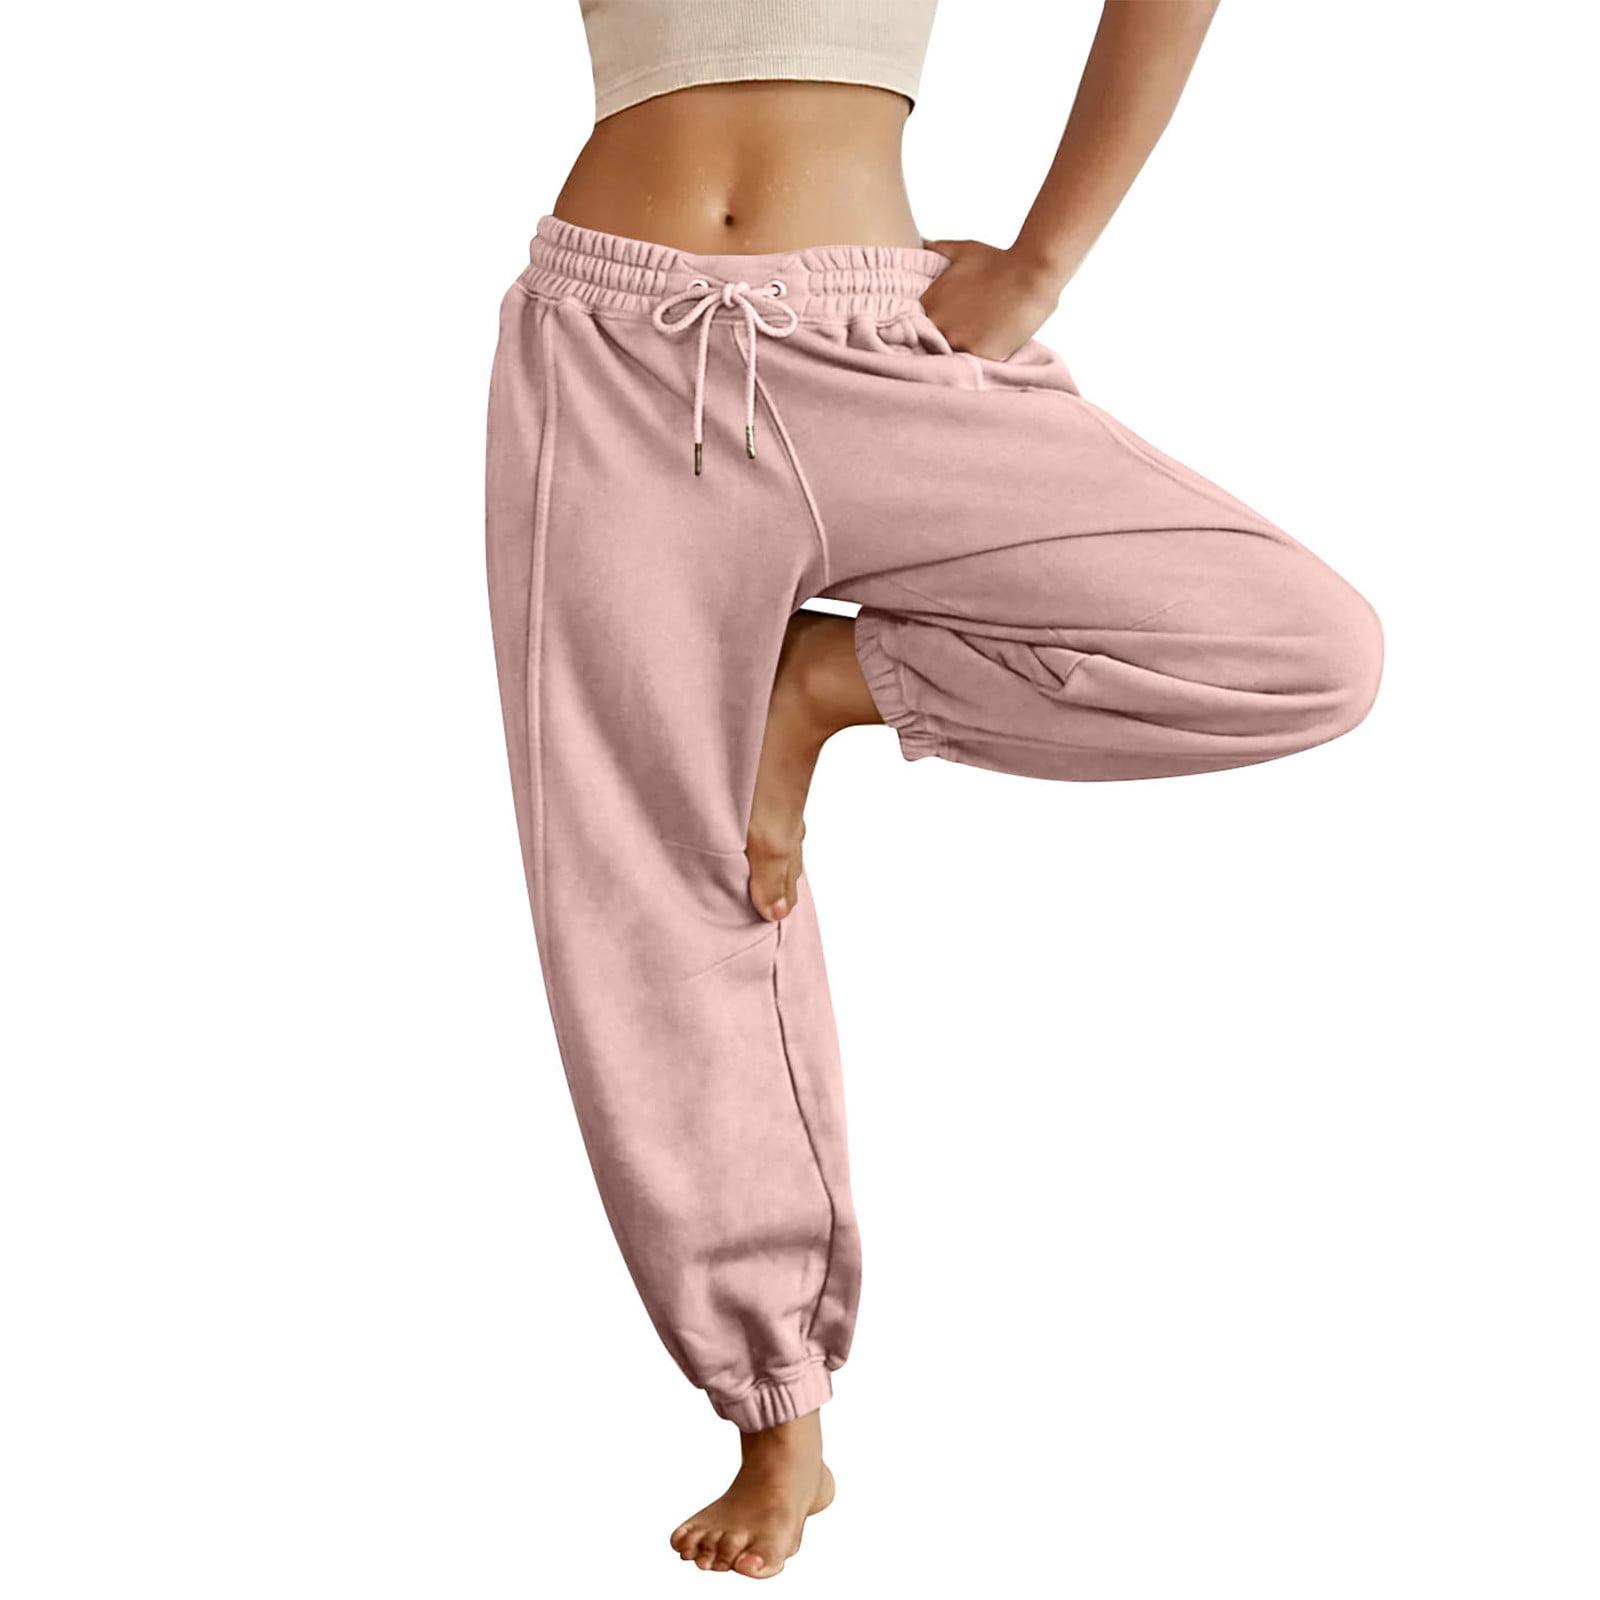 HSMQHJWE Yoga Pants For Tall Women Petite On Dress Pants For Women Business  Casual Womens Yoga Sweatpants Comfy Loose Casual Wide Leg Lounge Joggers